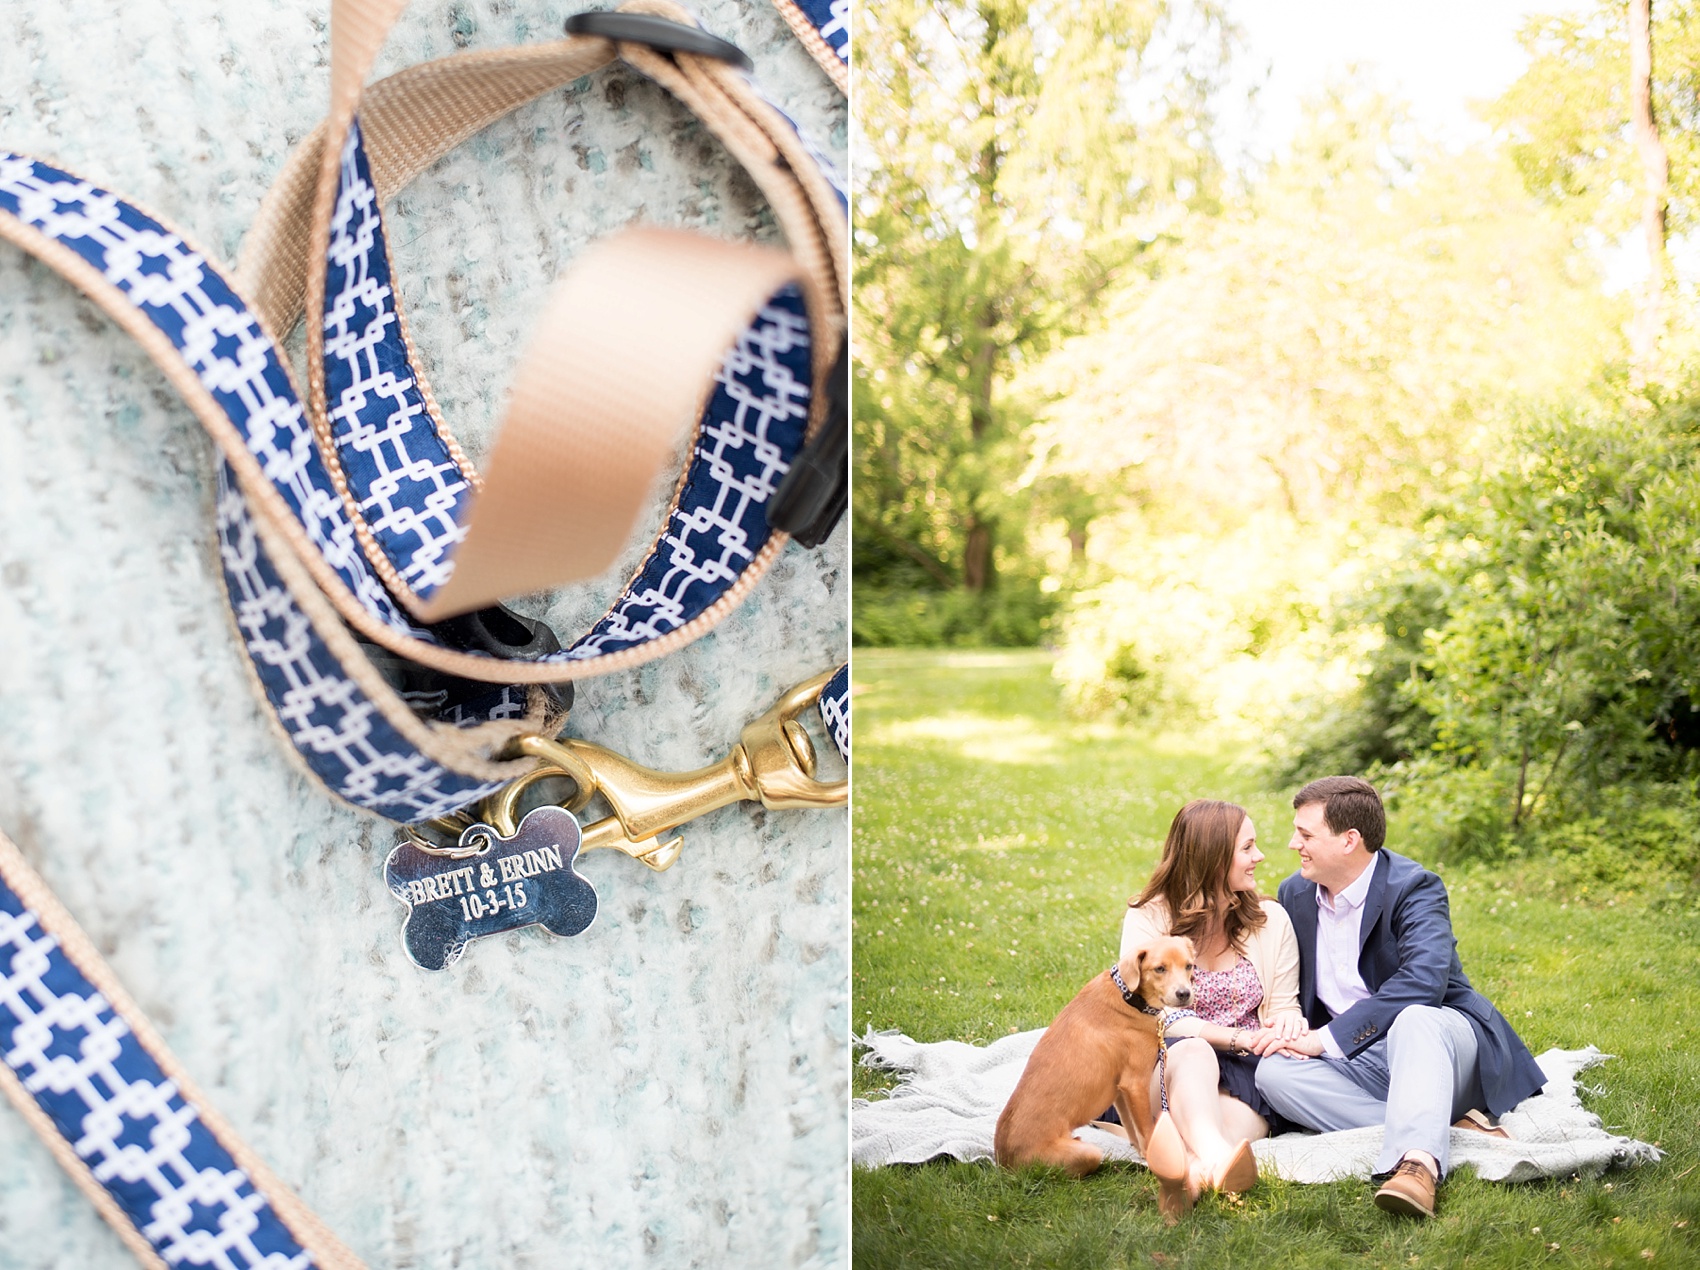 Dog tag with couple's wedding date for their Central Park Engagement session by NYC wedding photographer Mikkel Paige Photography.